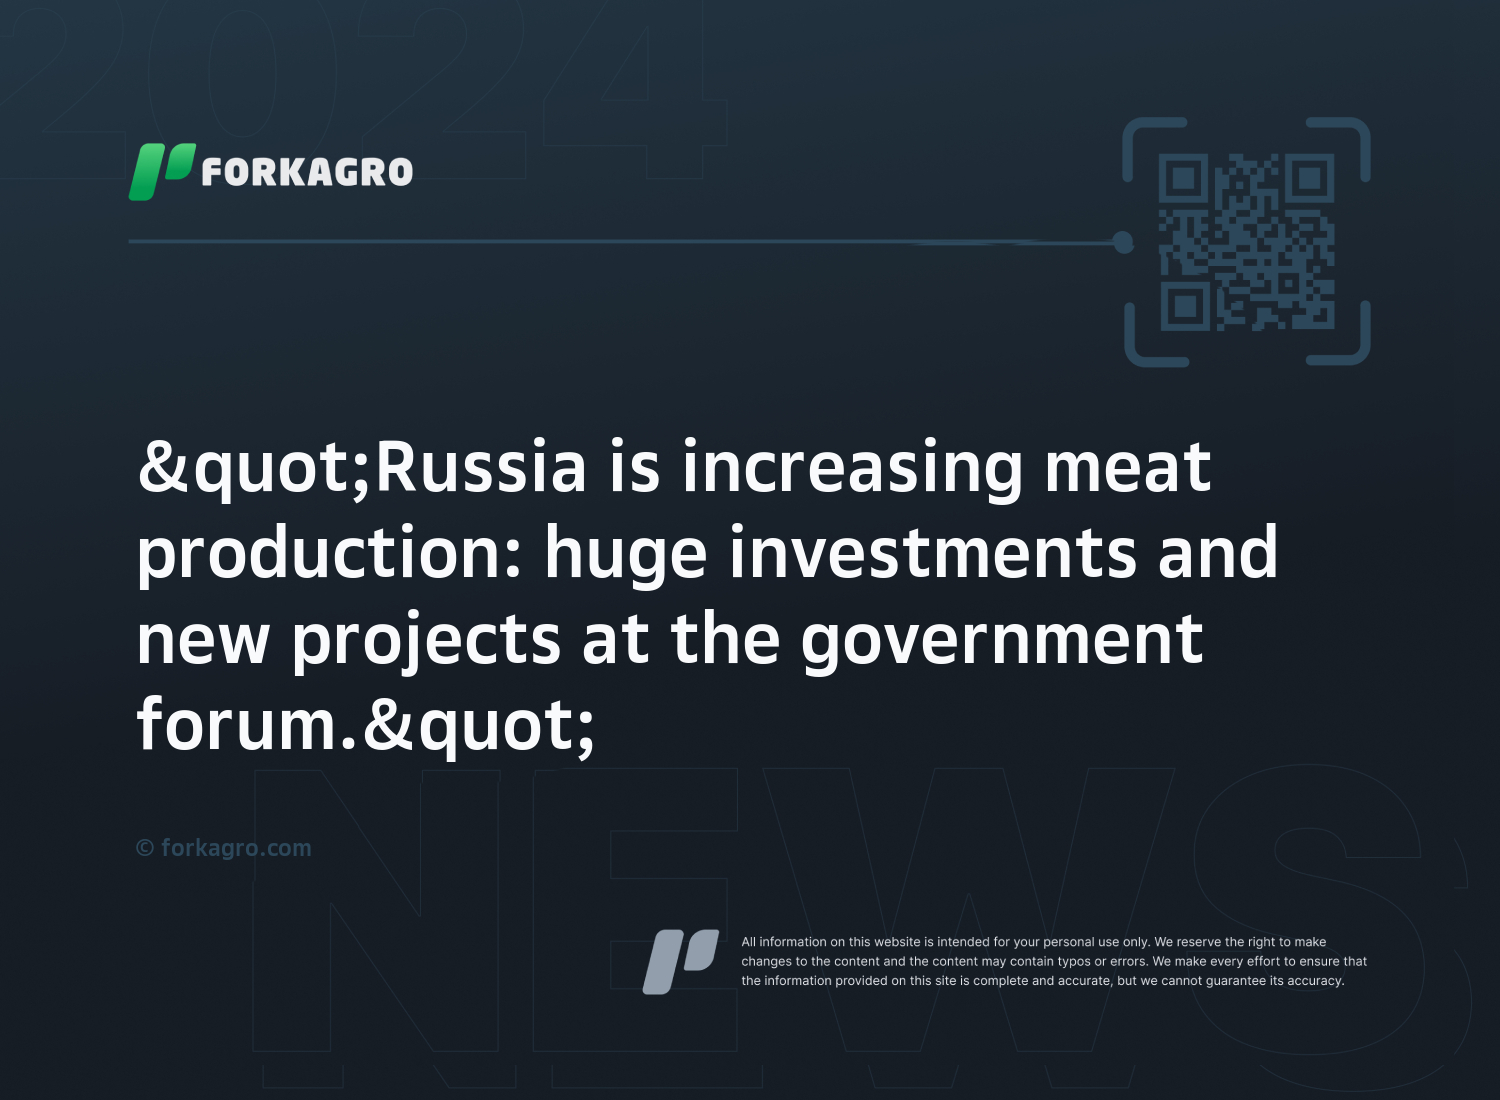 "Russia is increasing meat production: huge investments and new projects at the government forum."